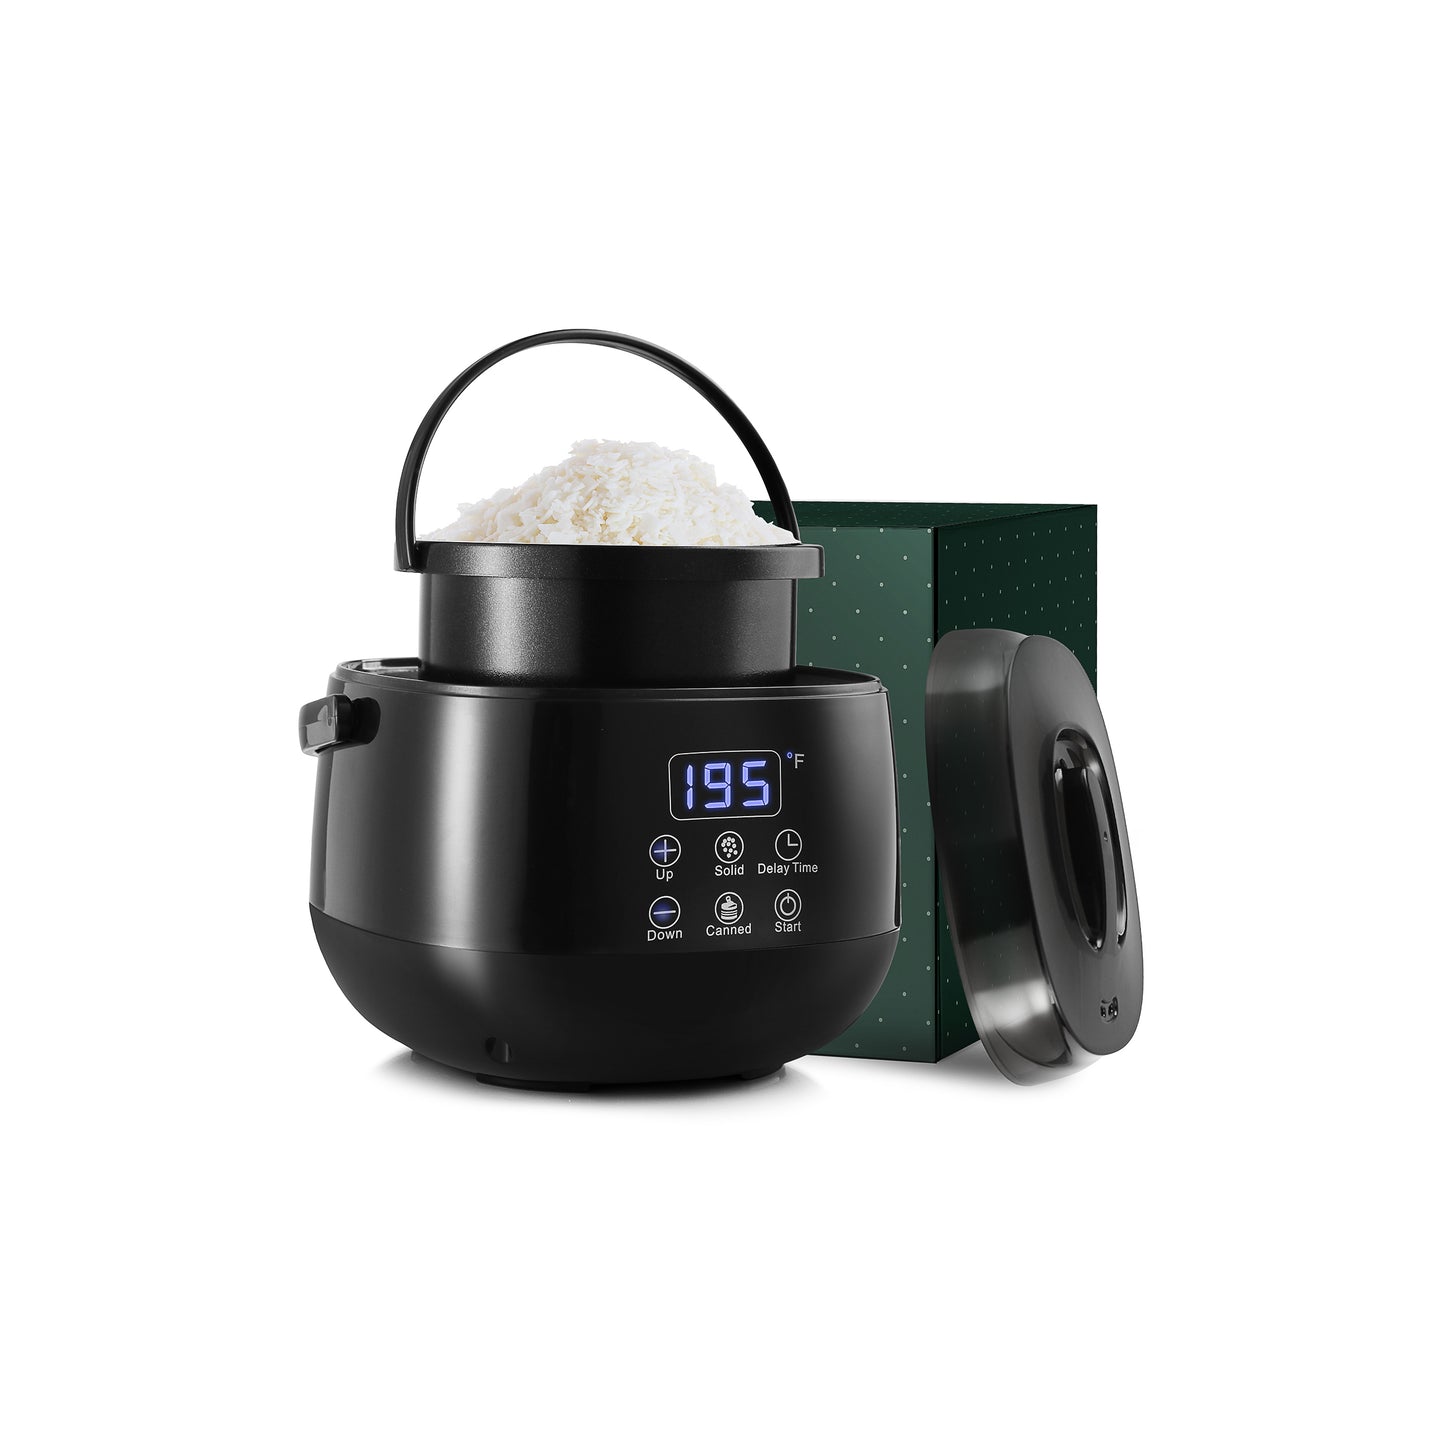  TCFUNDY Wax Melter for Candle Making, 8 Qts Electric Wax  Melting Pot with Pour Spout and Temperature Controller, Digital Temperature  Display, Fast Melting Candle Maker